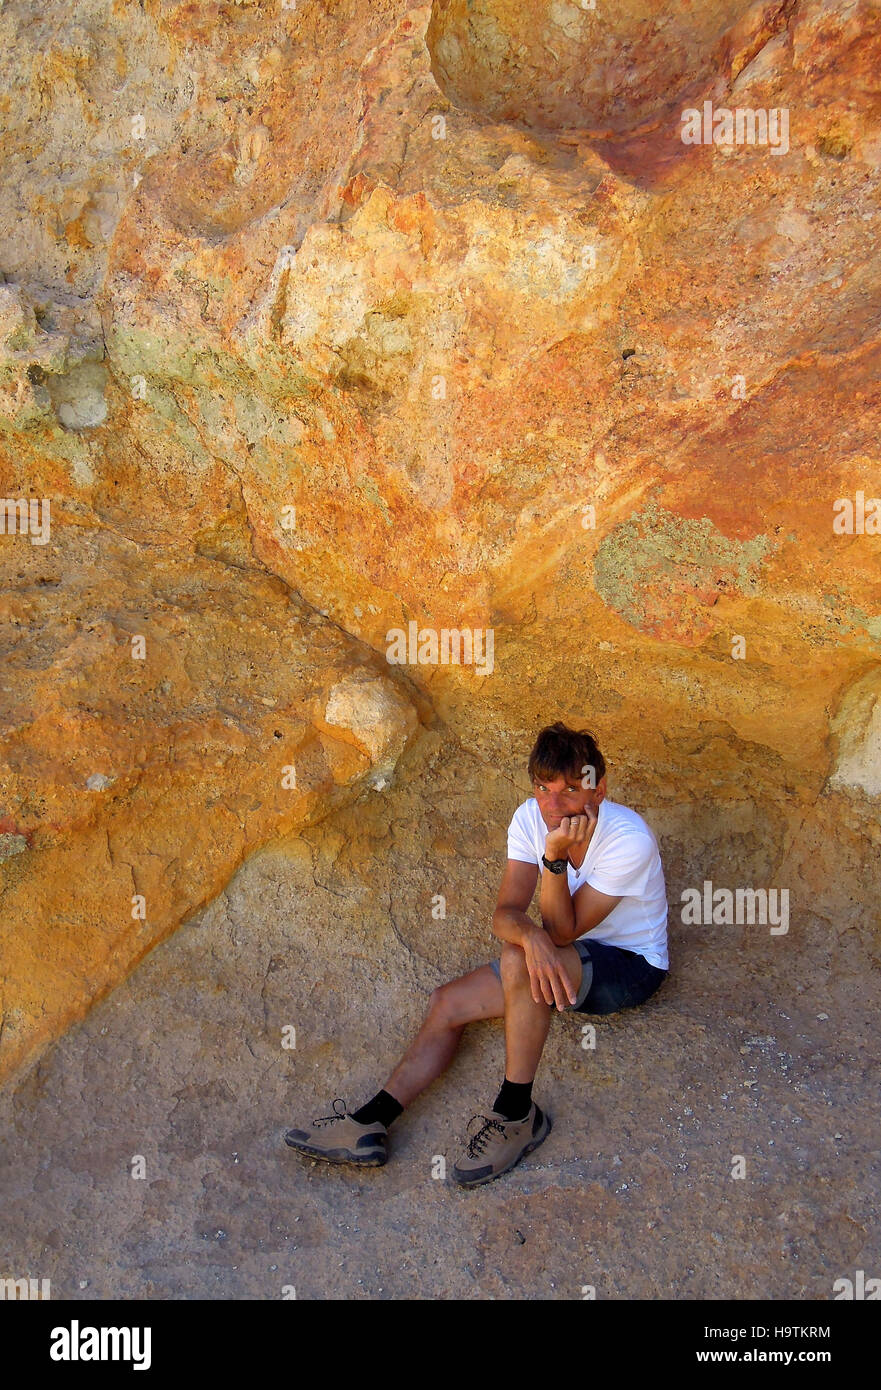 Man sits thoughtfully in Montaña Amarilla, Teide National Park, Tenerife, Canary Islands, Spain Stock Photo